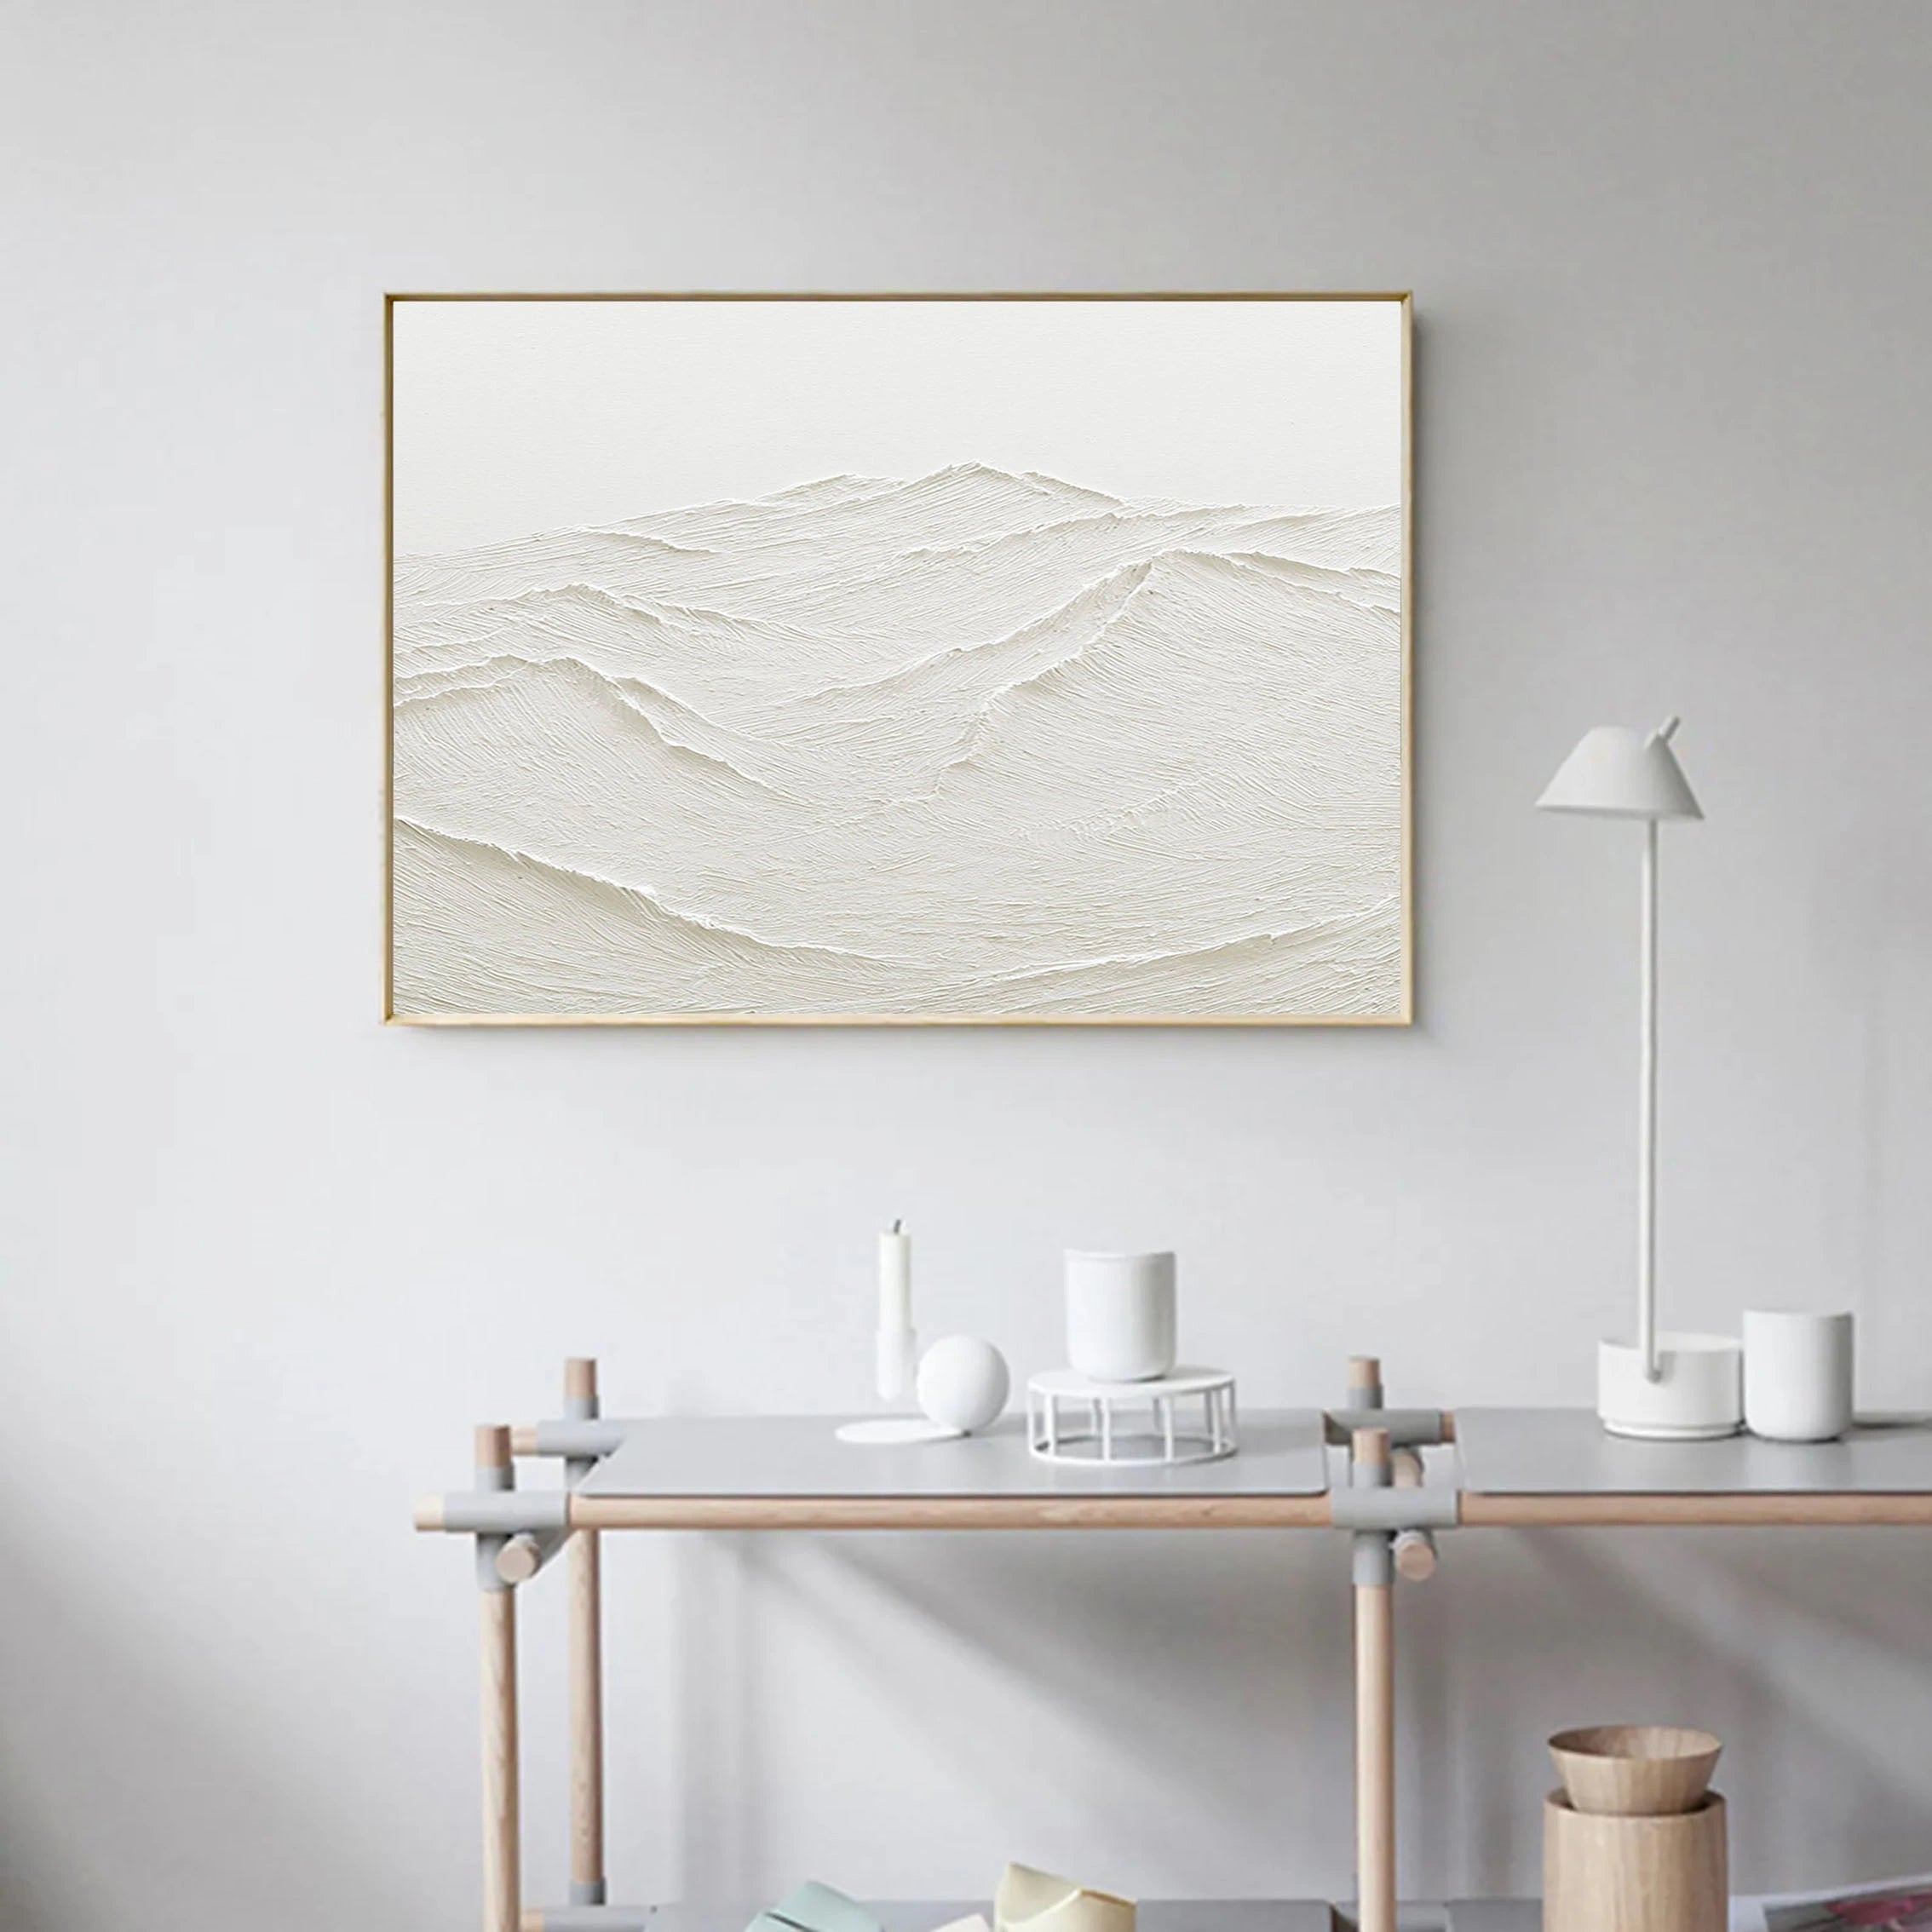 White Rich Textured Landscape Plaster Art Painting, Handcrafted Mountain Minimalist Wall Art